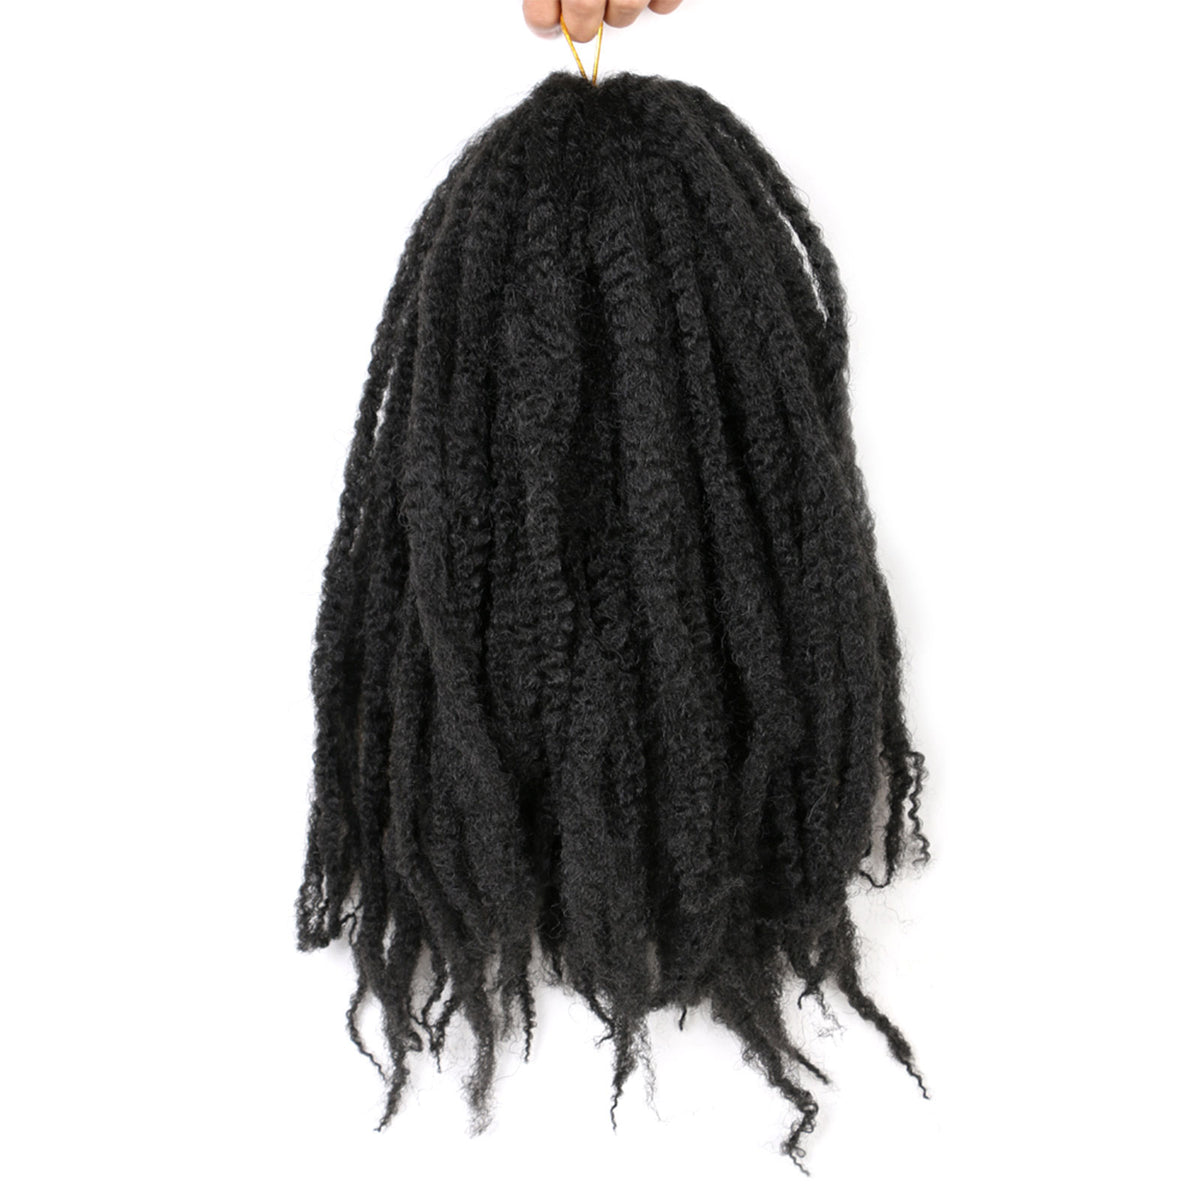 24 Inches Pack of 3 Marley Hair For Faux Locs Soft & Bouncy Cuban Twist Hair Synthetic Kanekalon Kinky Twist Hair For Braiding Crochet Marley Twist Braiding Hair For Black Woman 1B / Natural Black